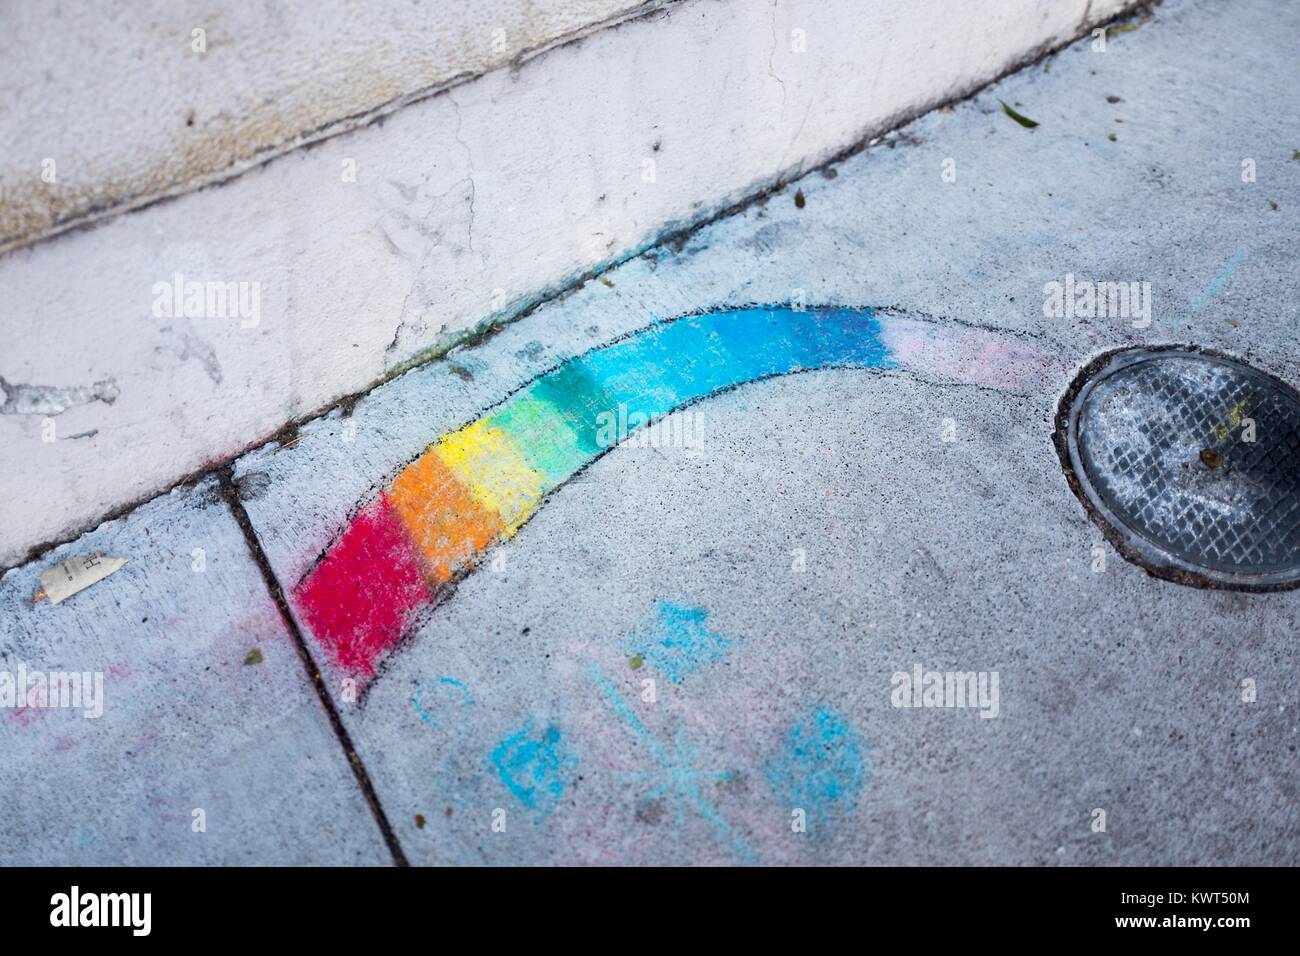 In the Gourmet Ghetto (North Shattuck) neighborhood of Berkeley, California, someone has used sidewalk chalk to draw a rainbow on the sidewalk, a symbol both of the hippie movement and of LGBT rights, October 6, 2017. () Stock Photo